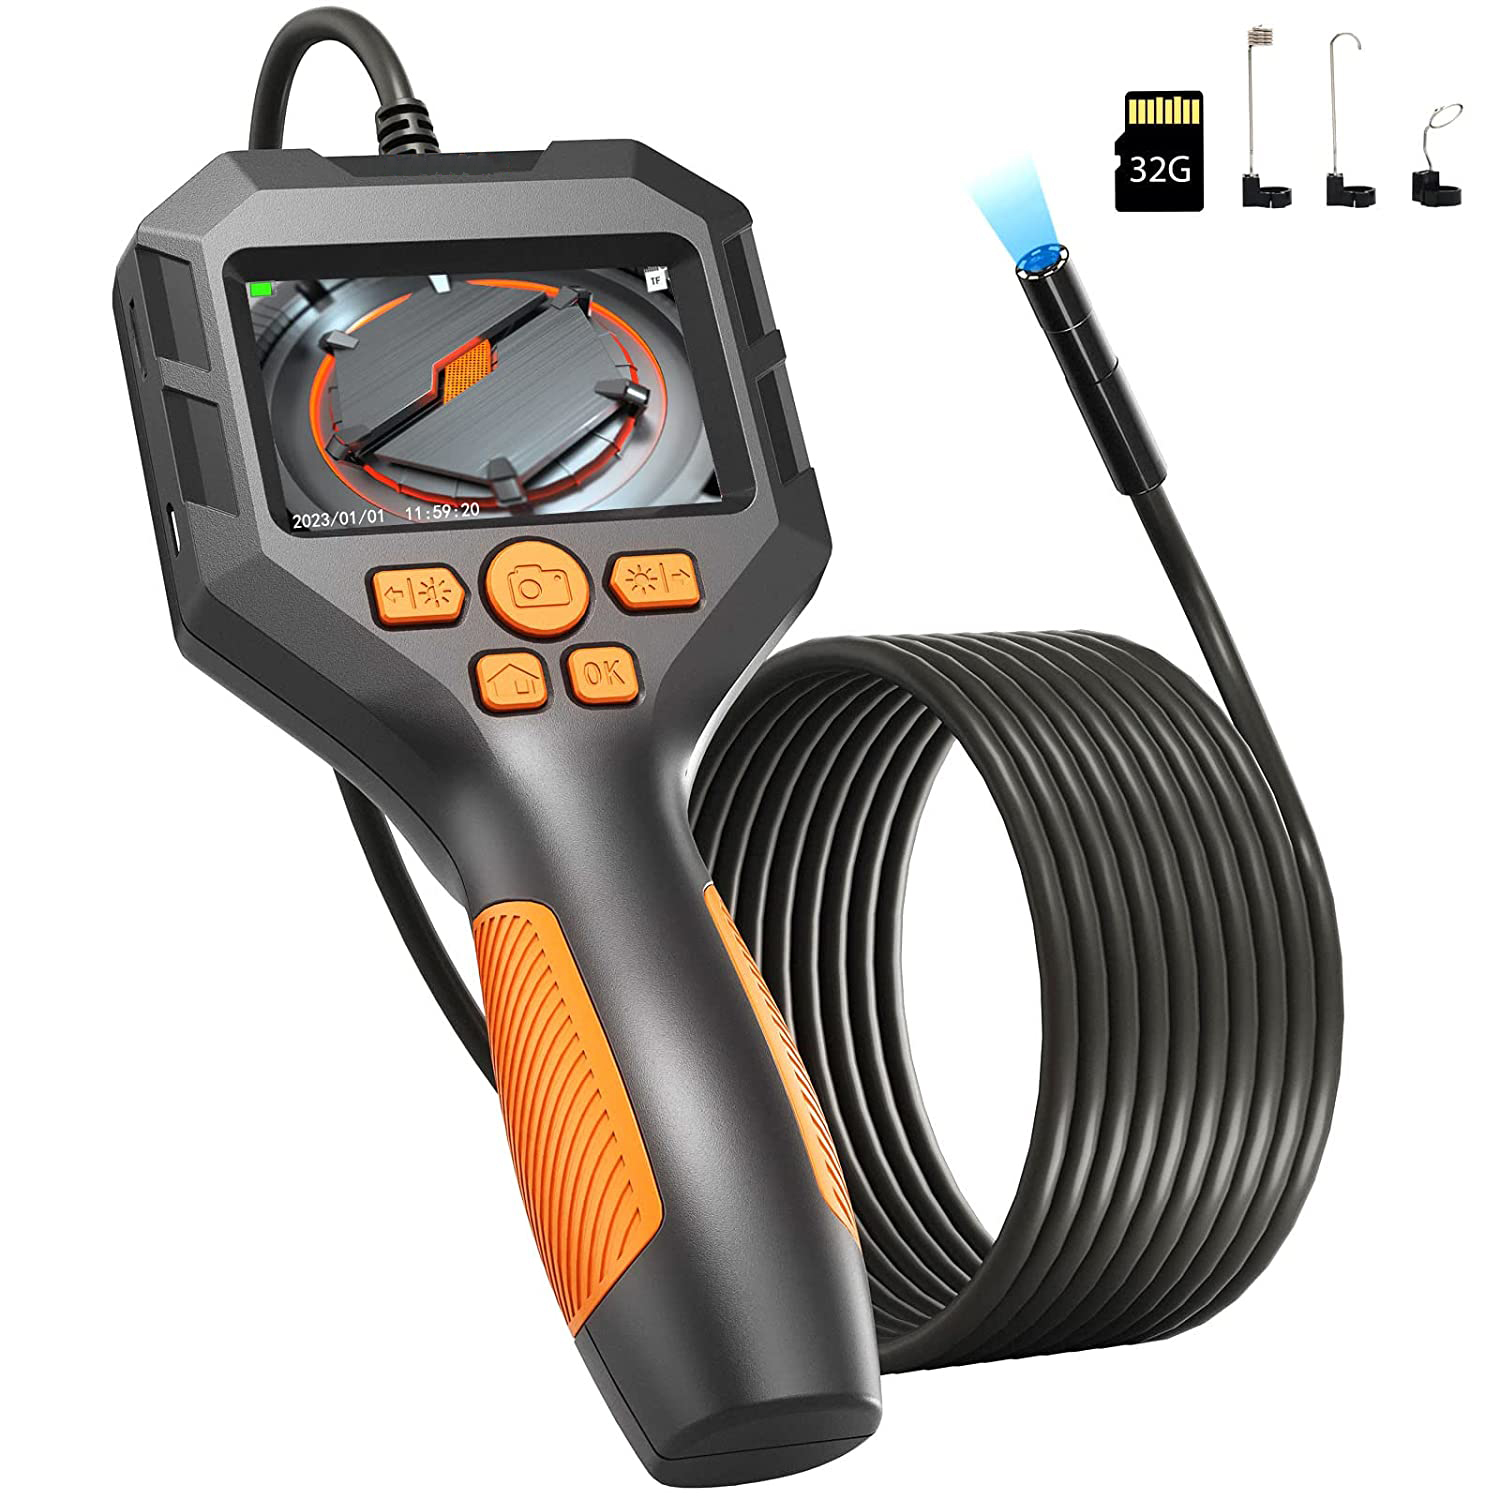 Inspection Camera, Triple Lens Teslong Borescope with 6 IPS Split Screen,  WiFi Endoscope Camera with Light IP67 Waterproof Flexible Cable Scope